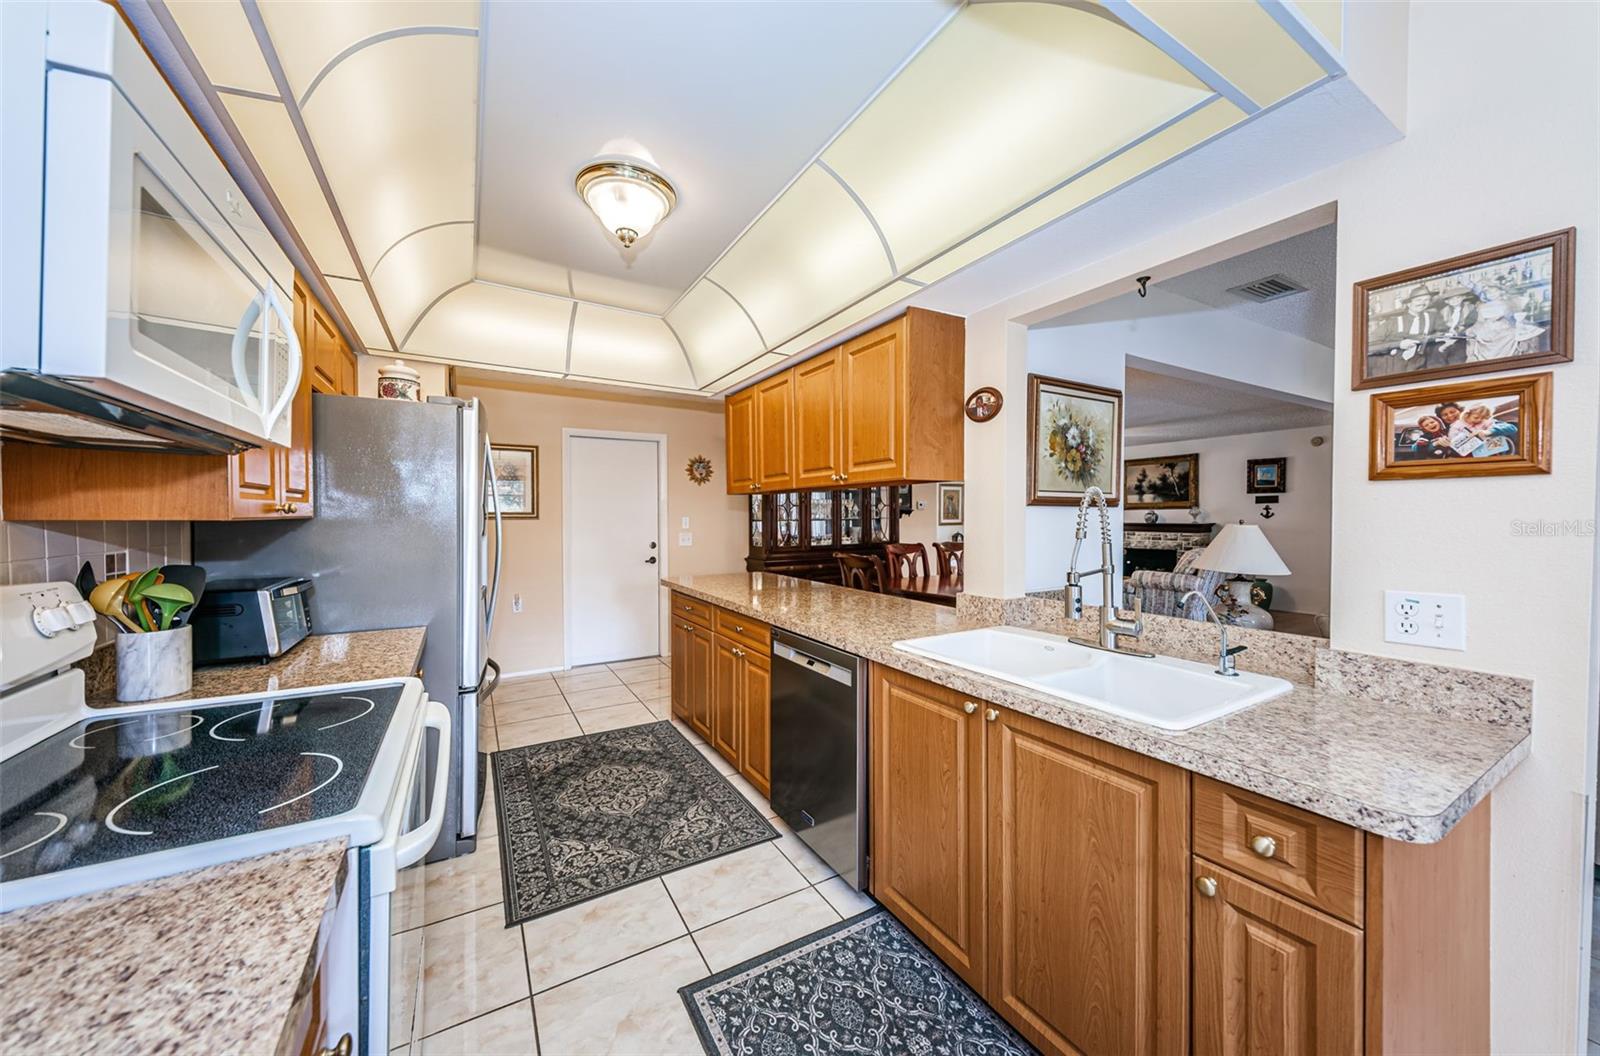 Nice size kitchen with a generous amount of cabinets and counterspace.  Also an x-large built-in pantry.